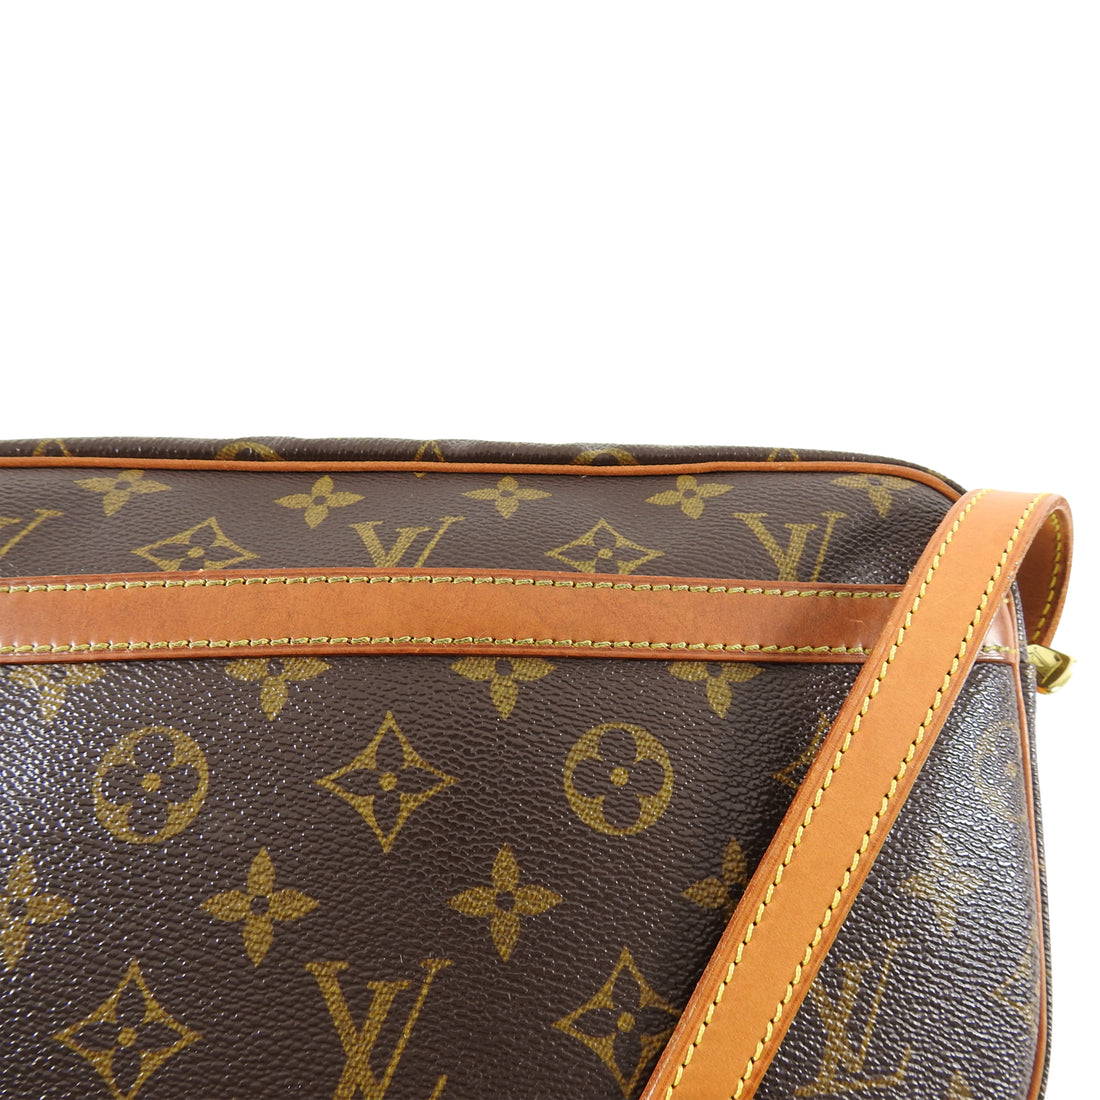 Jeune fille leather crossbody bag Louis Vuitton Brown in Leather - 35519713